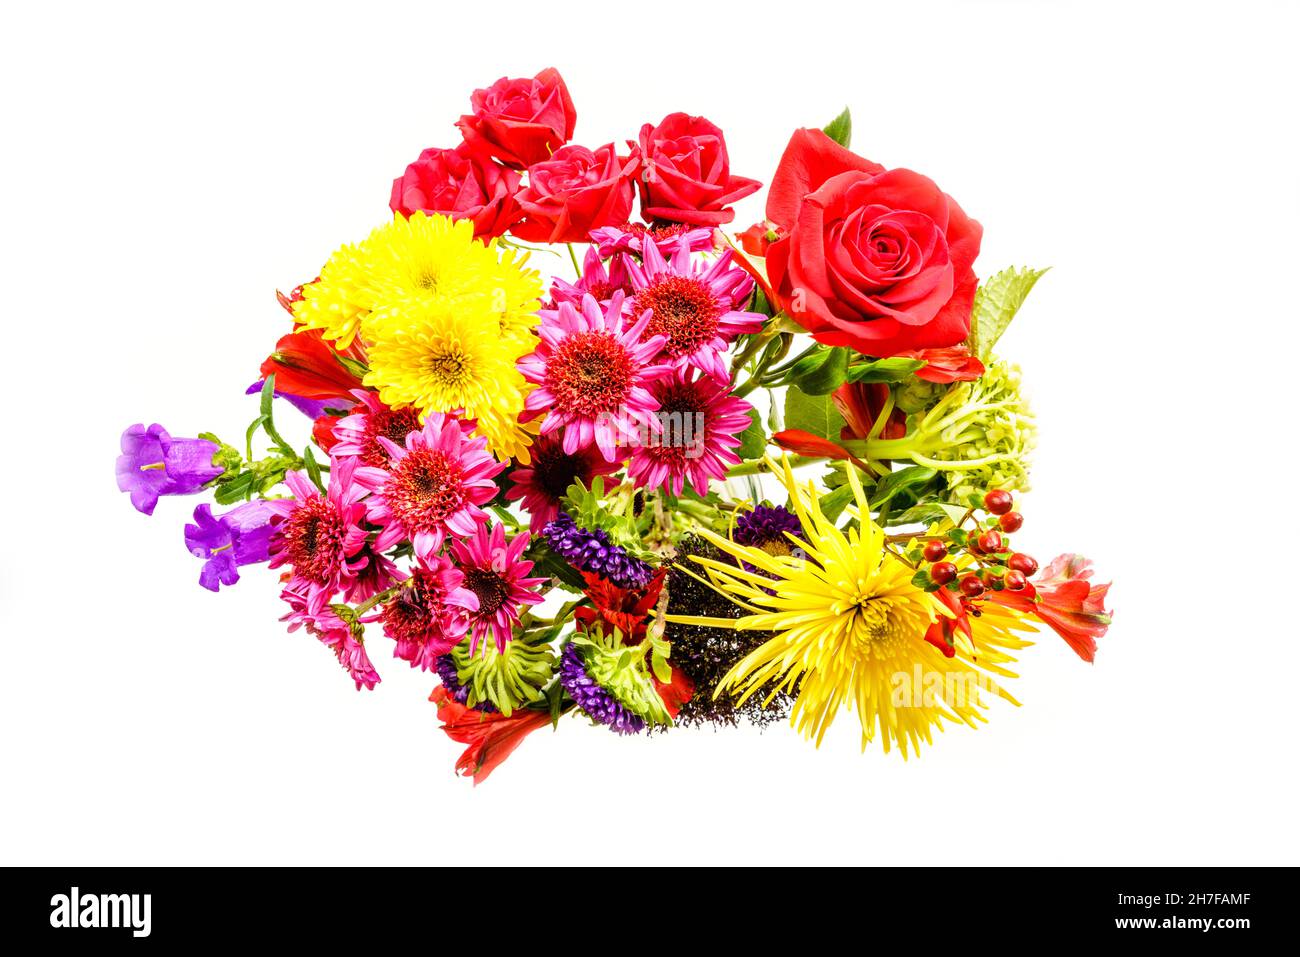 Top view of a beautiful spring flower bouquet isolated on white background Stock Photo